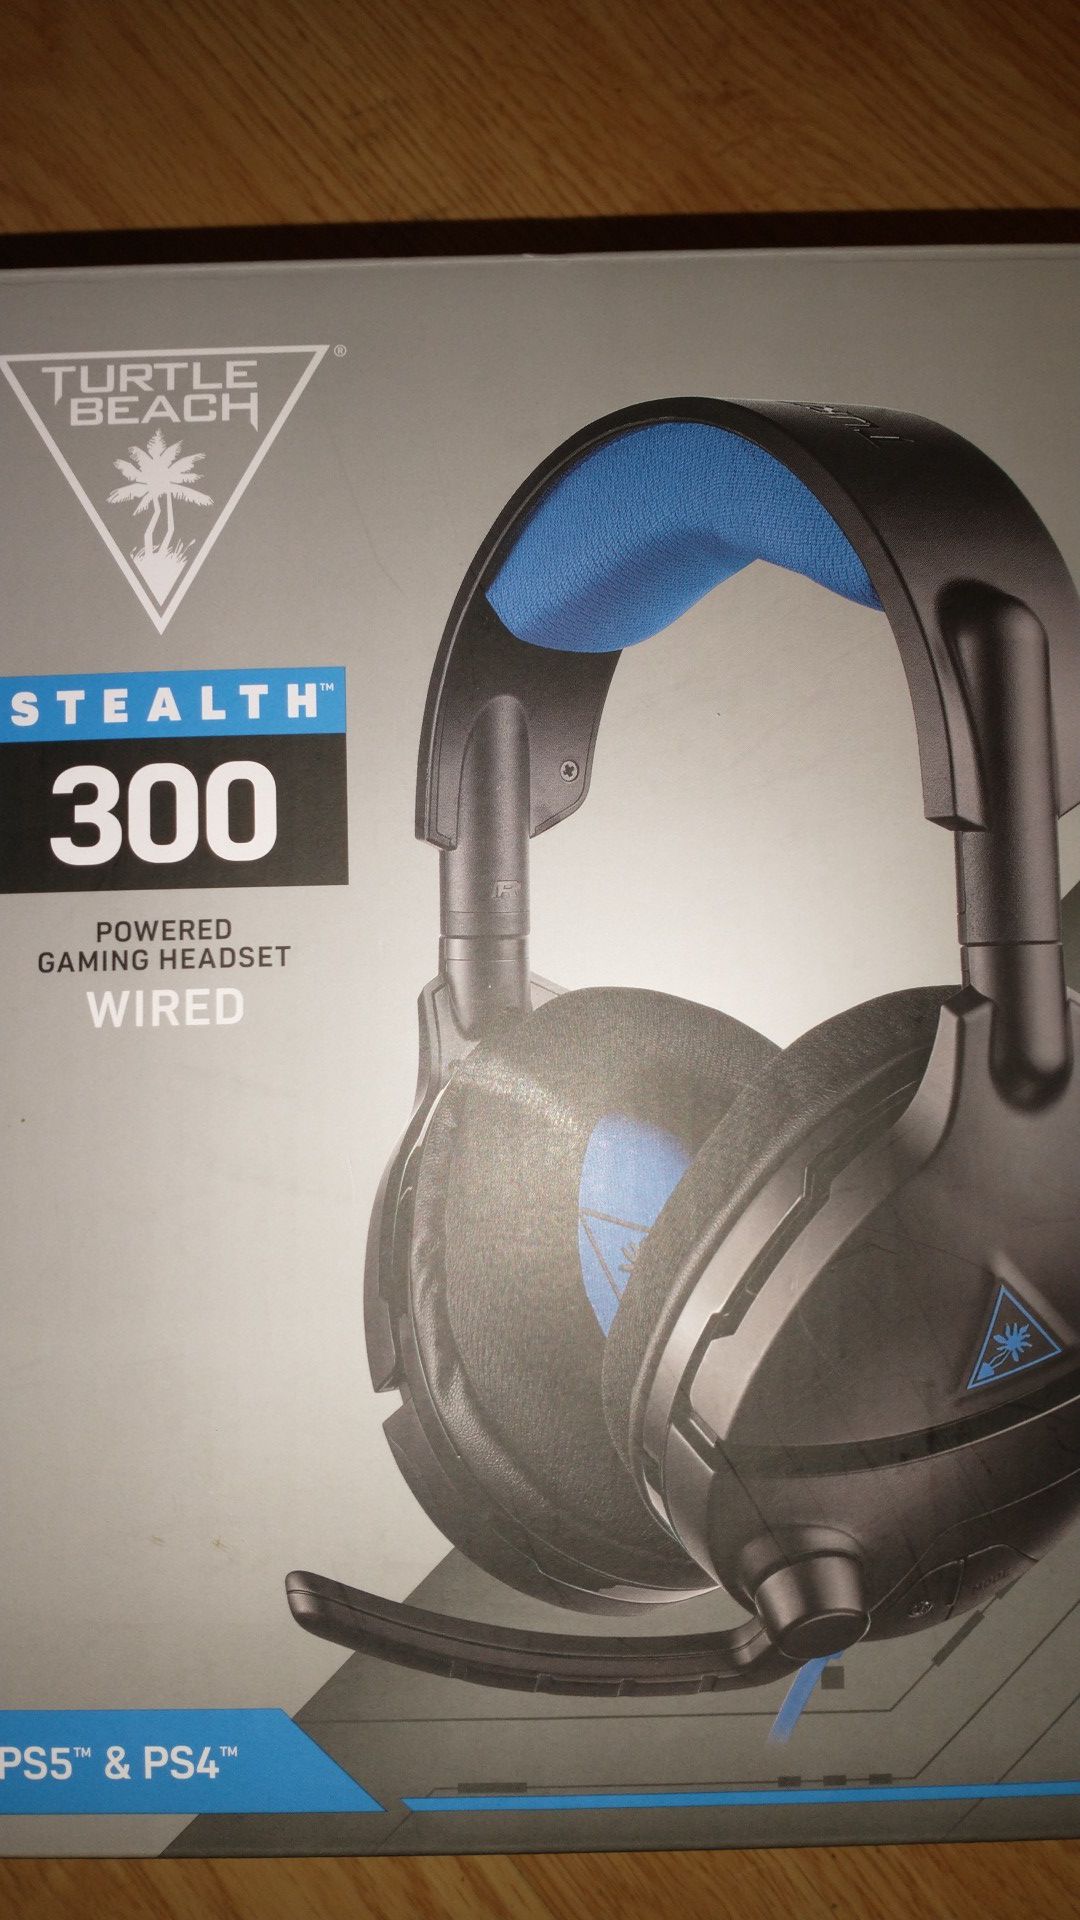 Turtle Beach Stealth 300 gaming headset